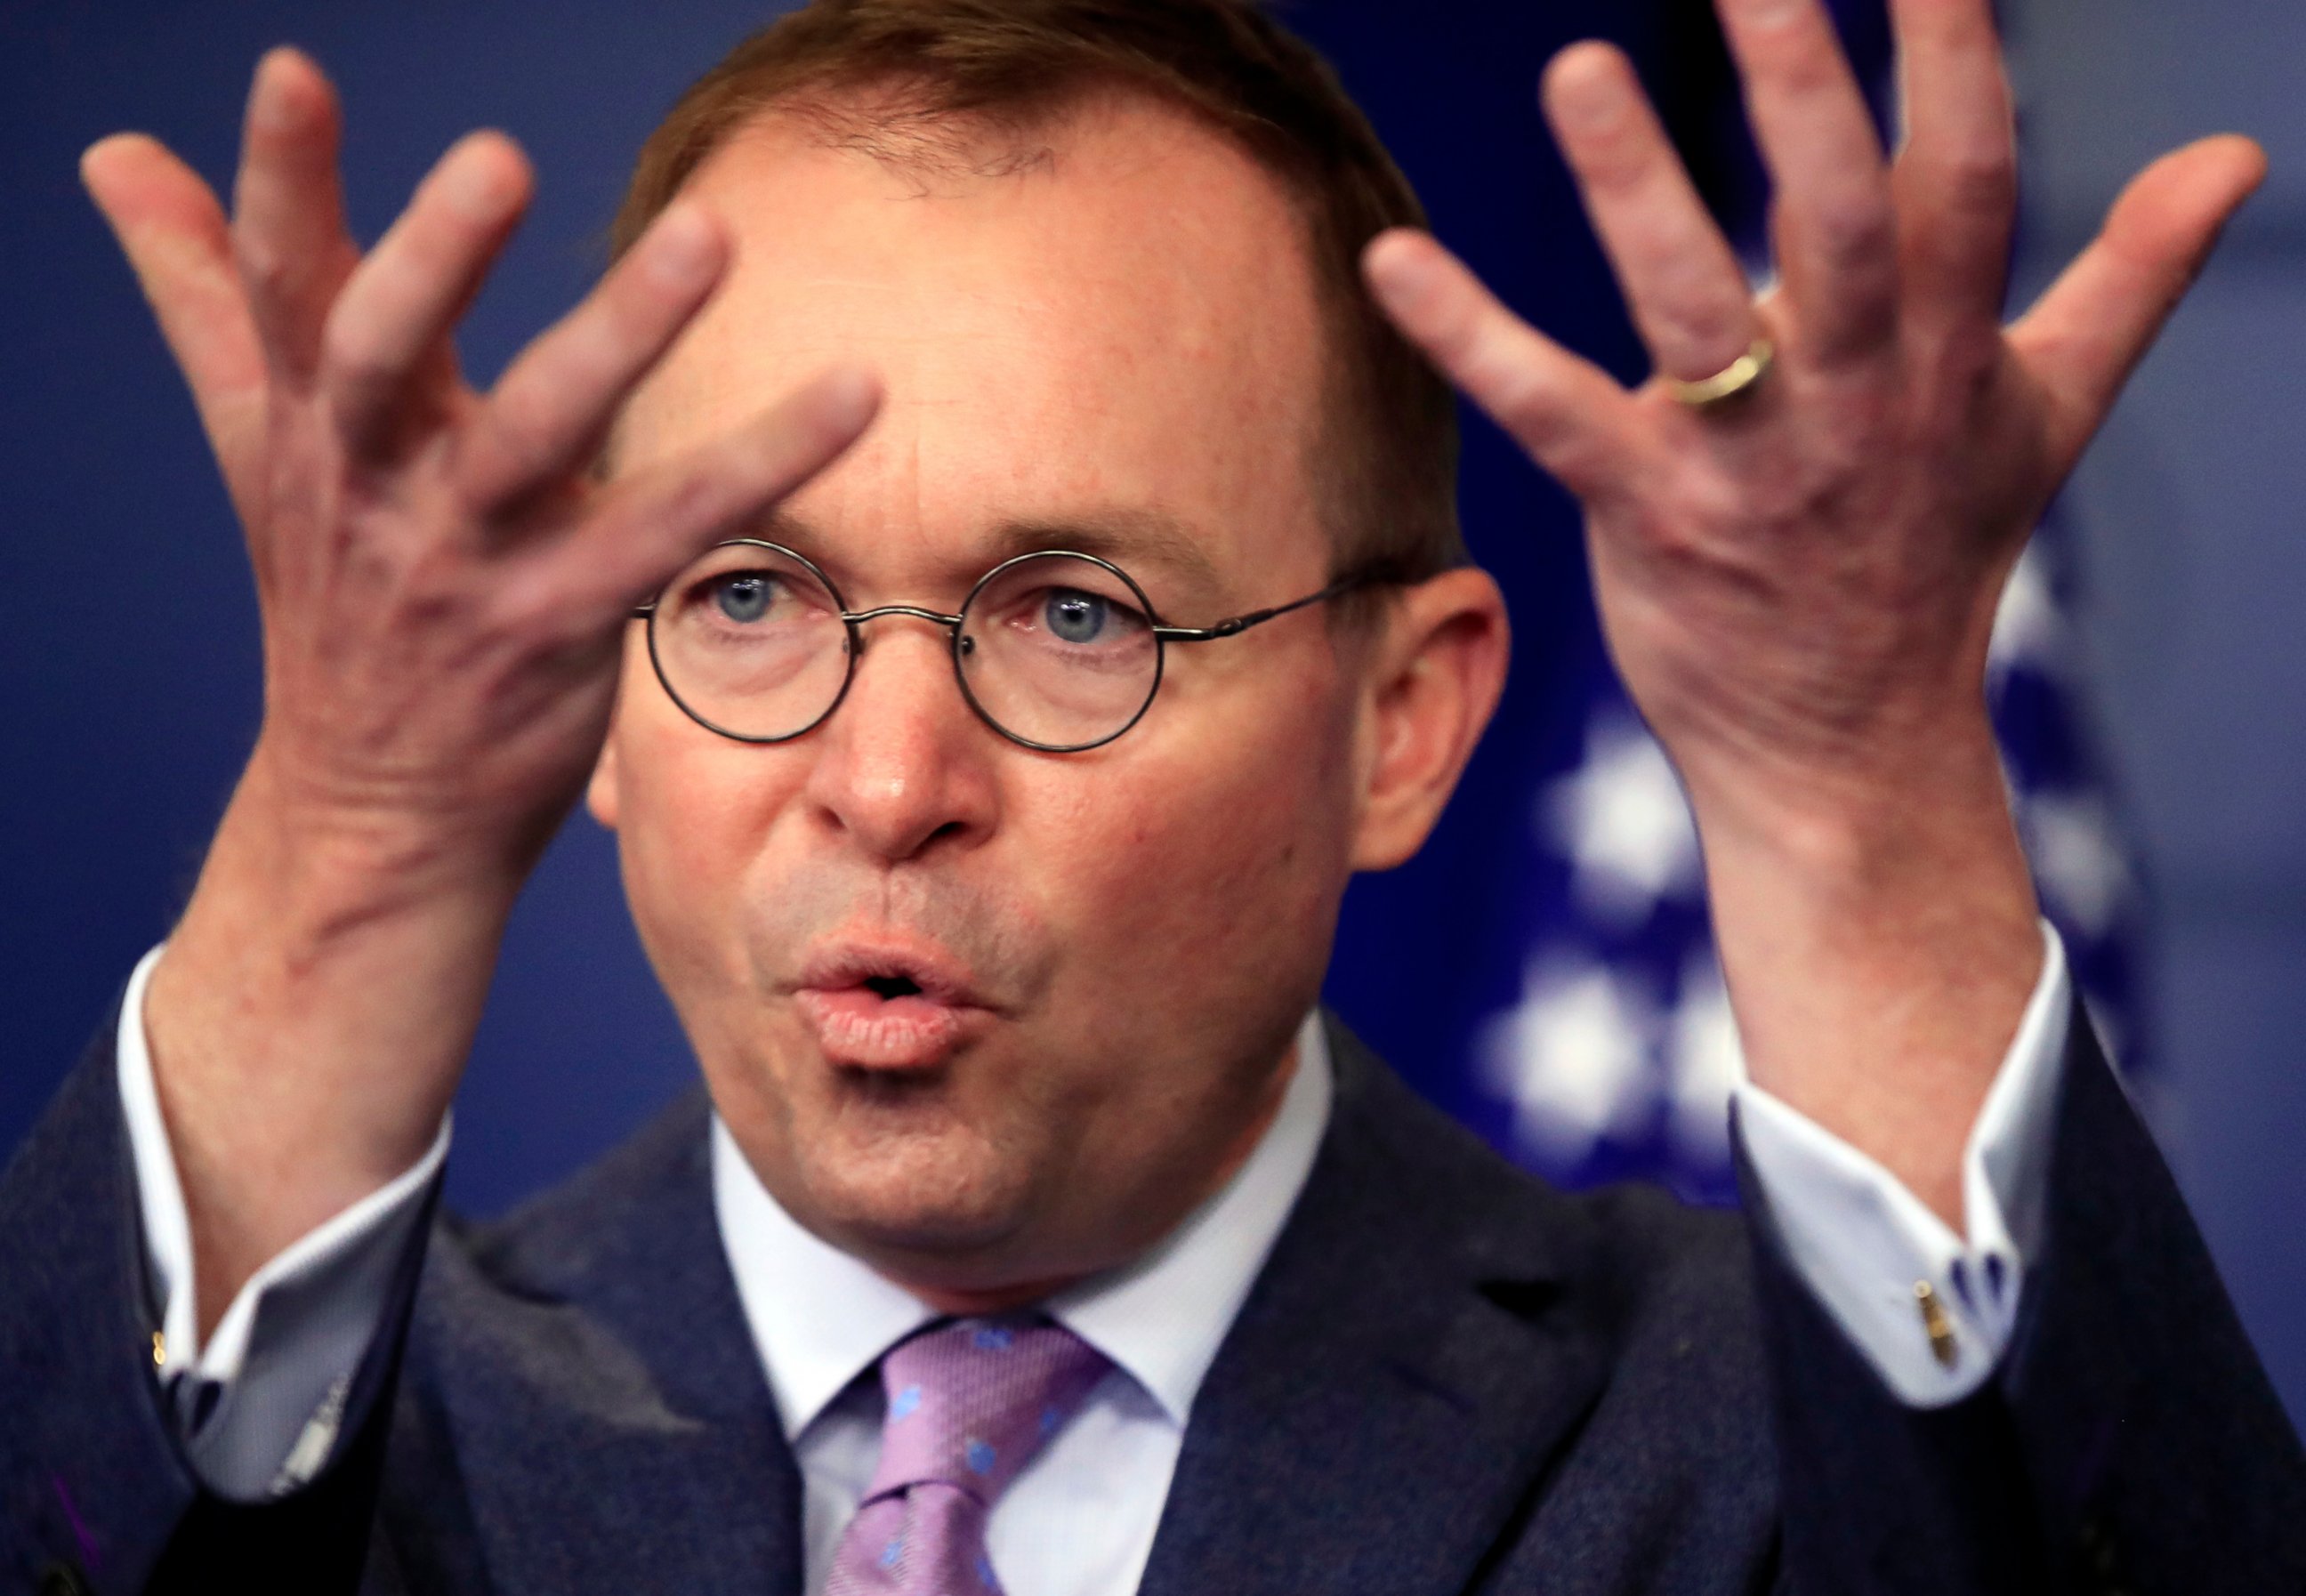 PHOTO: In this March 22, 2018, file photo, Office of Management and Budget Director Mick Mulvaney speaks in the Brady press briefing room at the White House in Washington. President Donald Trump has named Mulvaney as his new chief of staff.